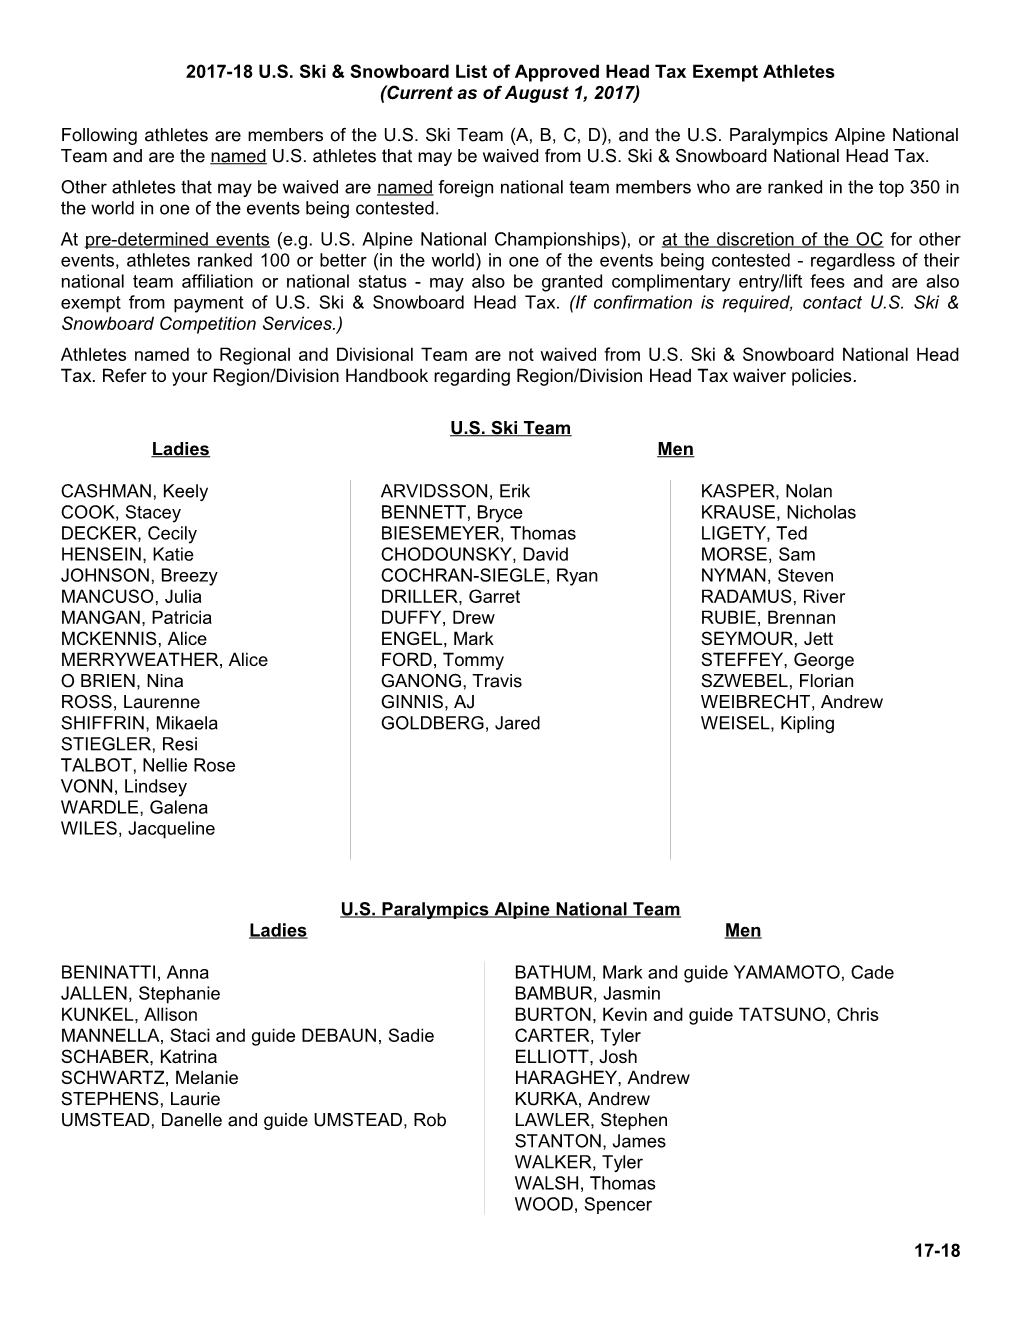 2005-2006 USSA List of Approved Head Tax Exempt Athletes